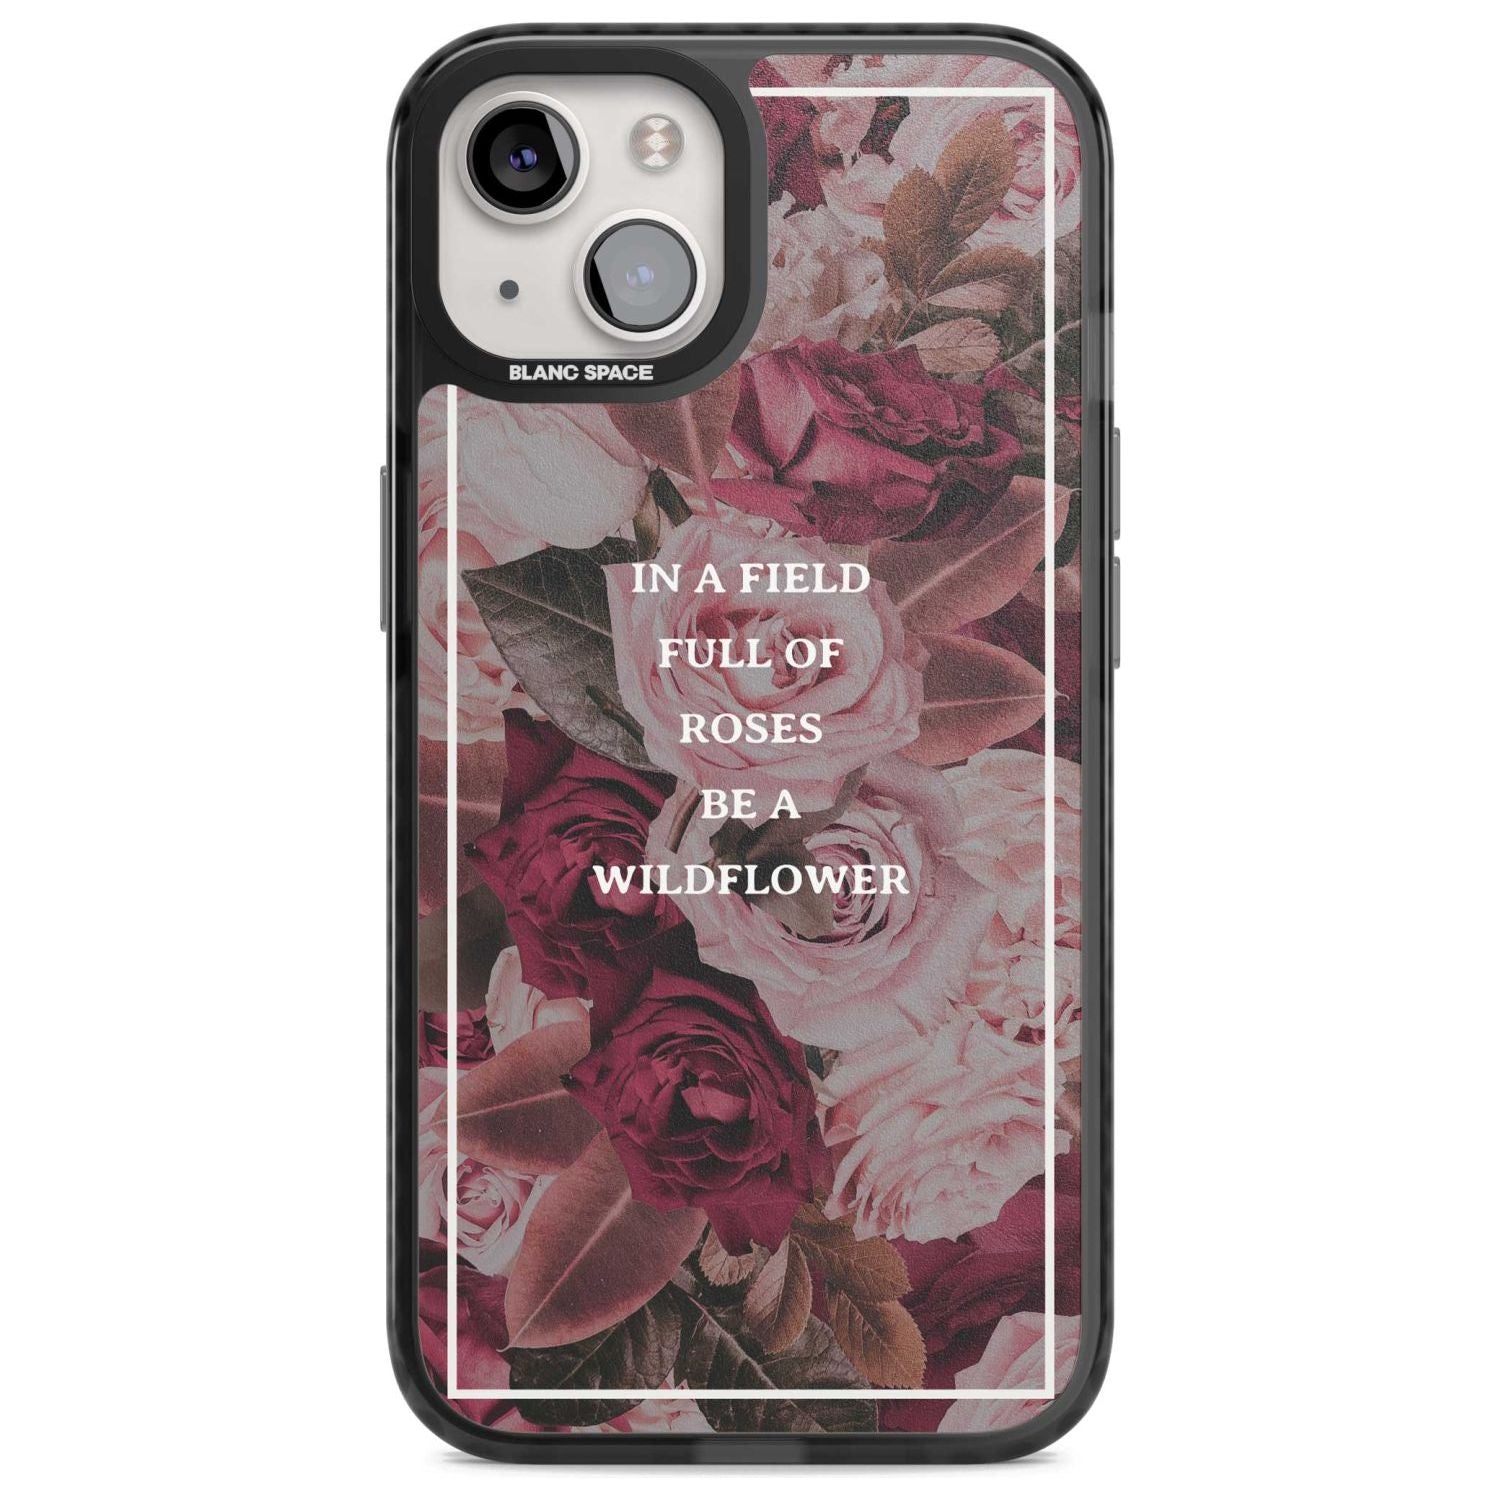 Be a Wildflower Floral Quote Phone Case iPhone 15 Plus / Magsafe Black Impact Case,iPhone 15 / Magsafe Black Impact Case,iPhone 14 Plus / Magsafe Black Impact Case,iPhone 14 / Magsafe Black Impact Case,iPhone 13 / Magsafe Black Impact Case Blanc Space